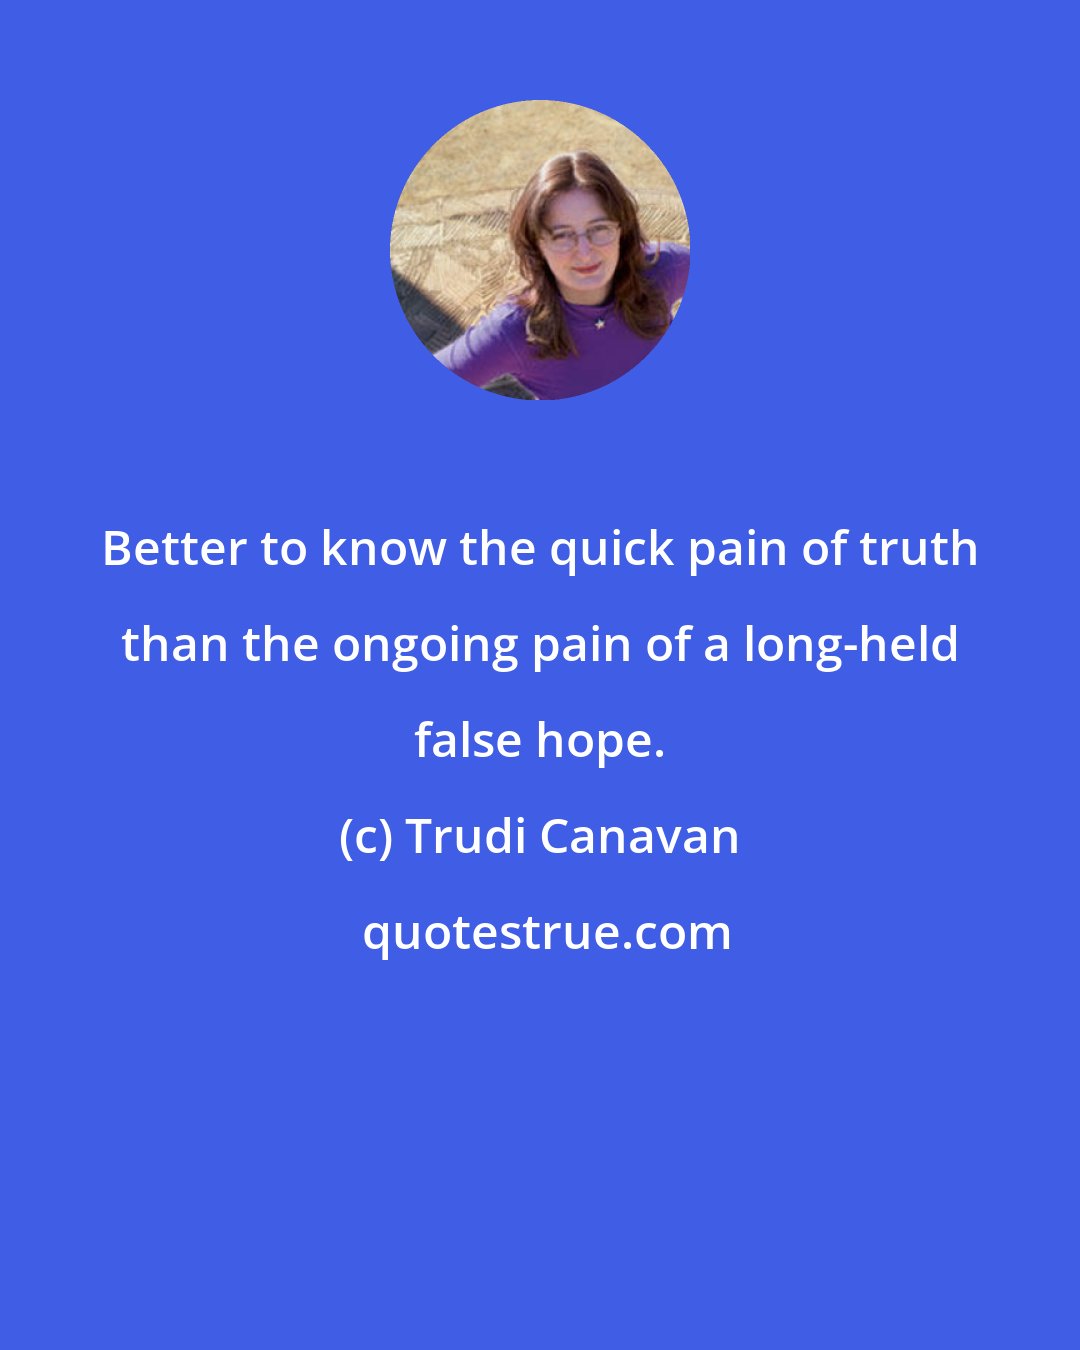 Trudi Canavan: Better to know the quick pain of truth than the ongoing pain of a long-held false hope.